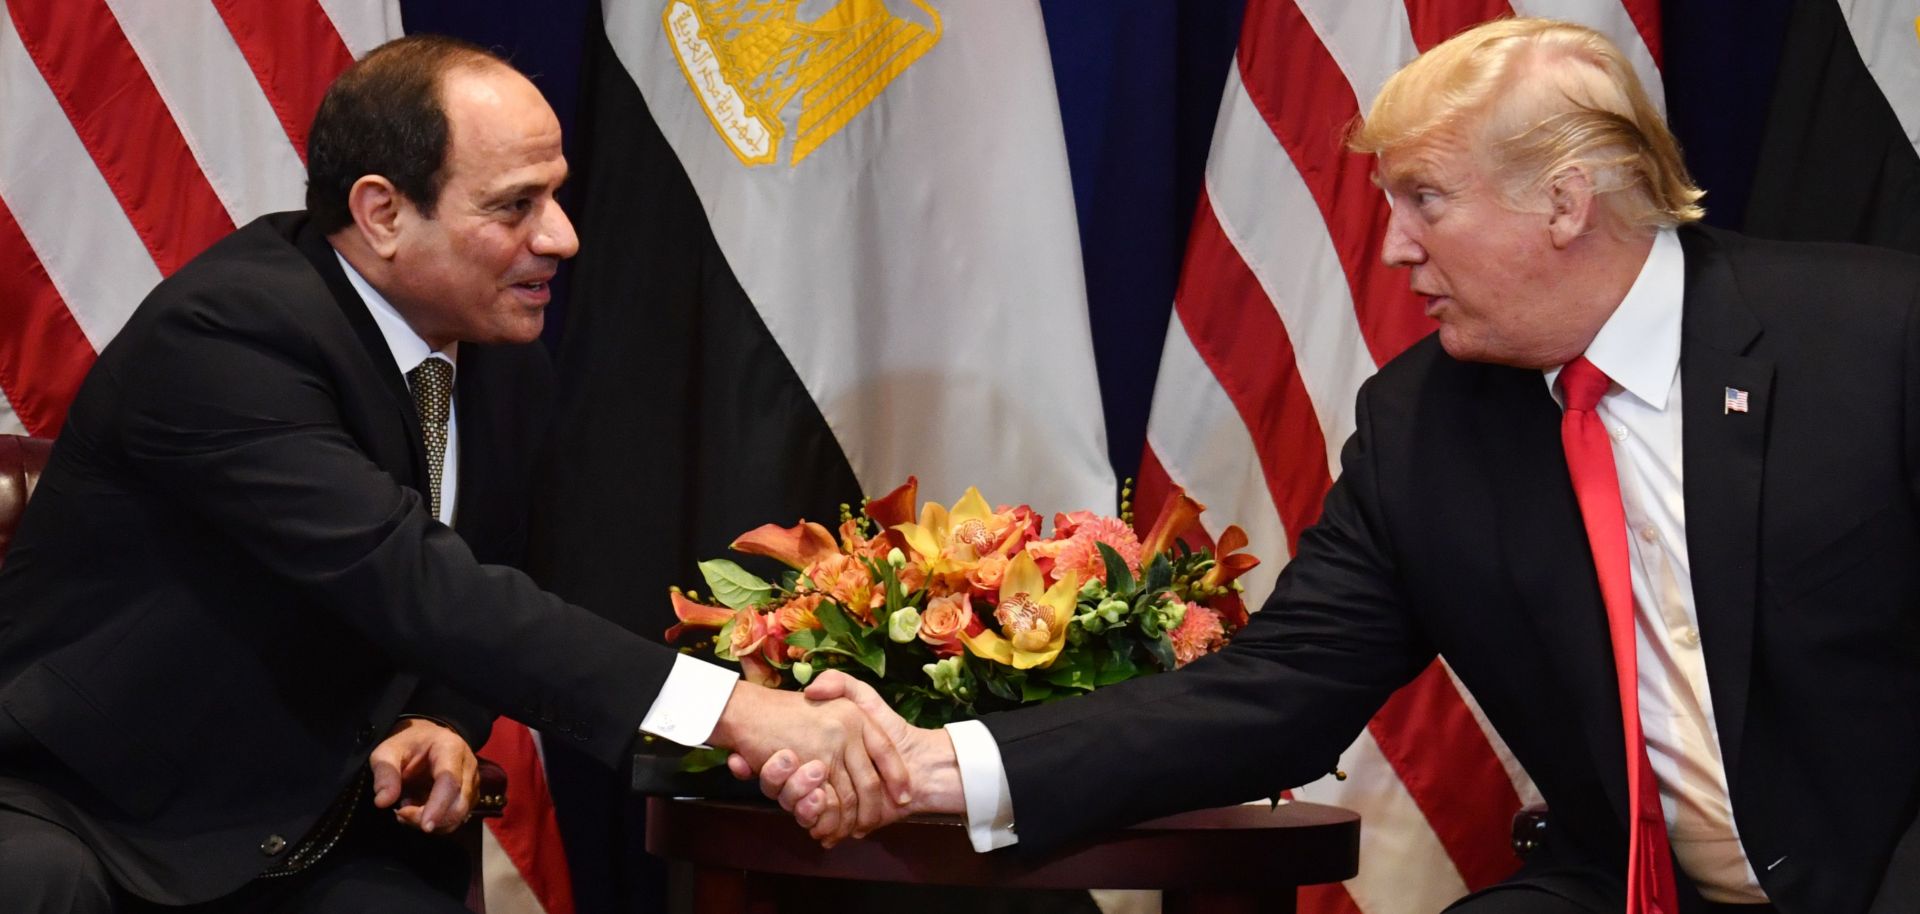 Egyptian President Abdel Fattah al-Sisi (L), shakes hands with U.S. President Donald Trump at the start of a bilateral meeting in New York on Sept. 24, 2018.